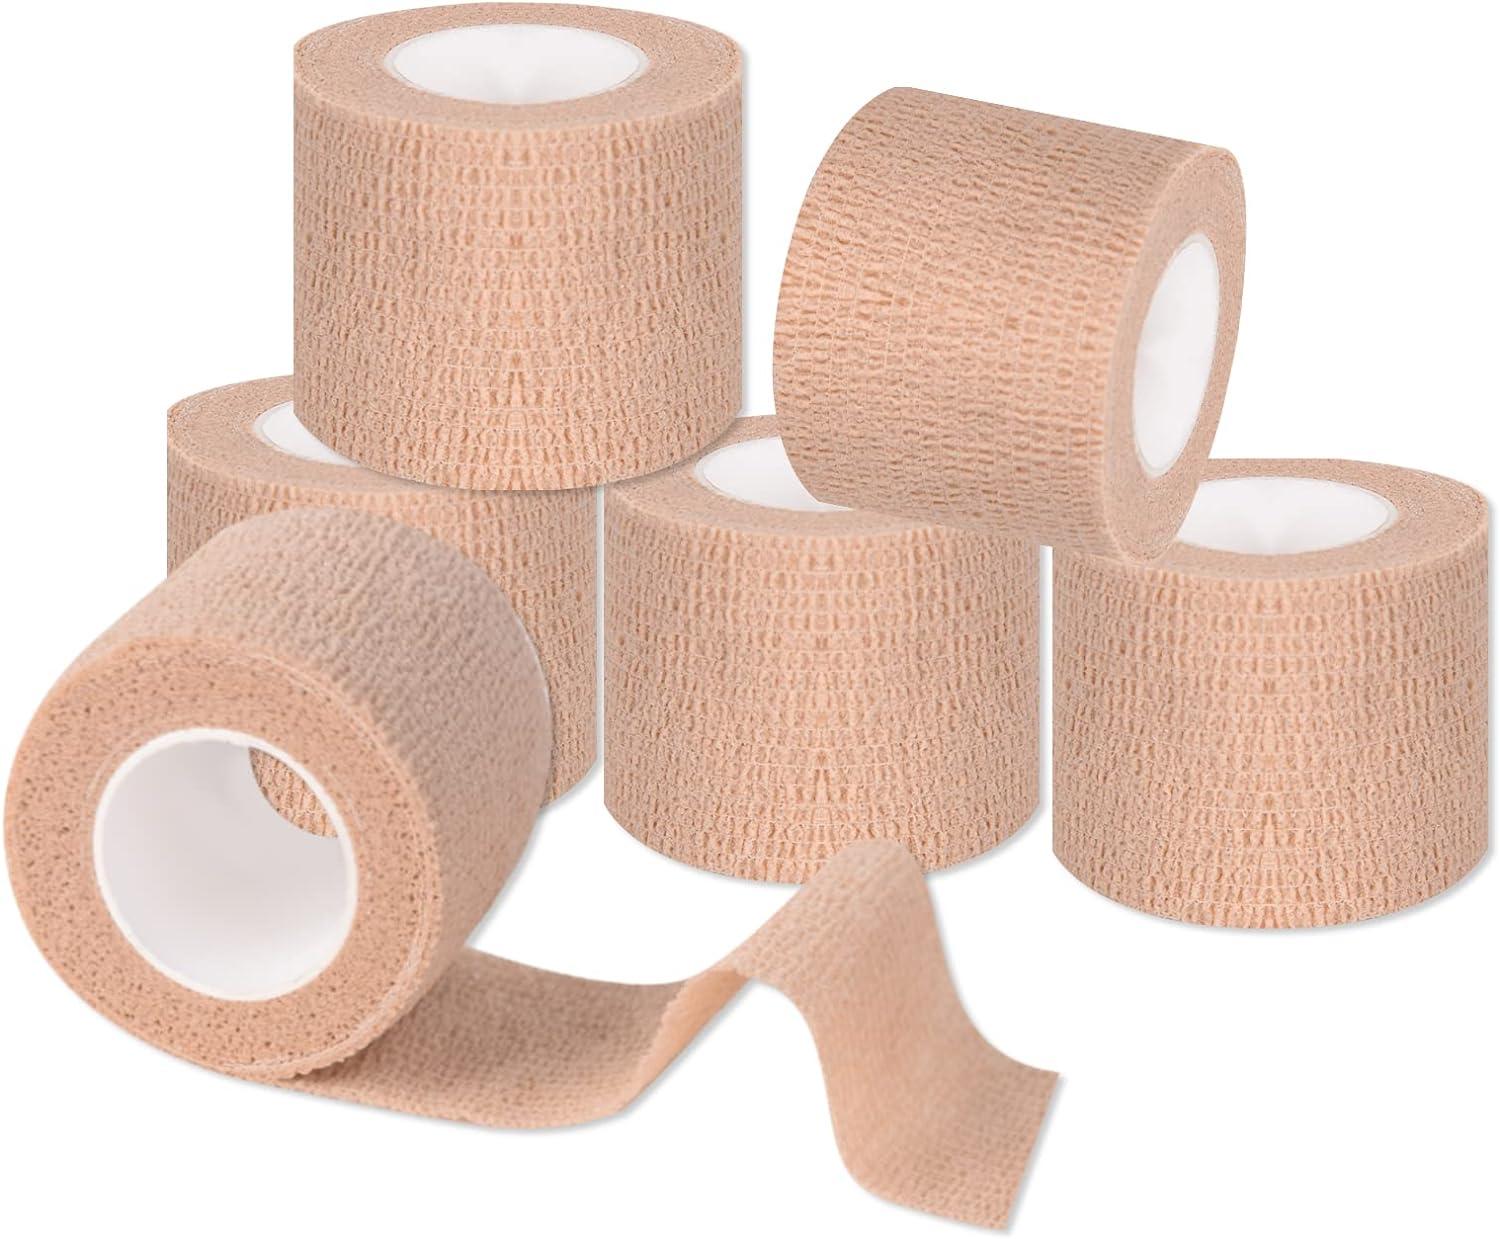 15 Pack 2 Inch x 5 Yards Self Adhesive Bandage Breathable Cohesive Bandage  Wrap Rolls Elastic Self-Adherent Tape for Stretch Athletic, Sports, Wrist